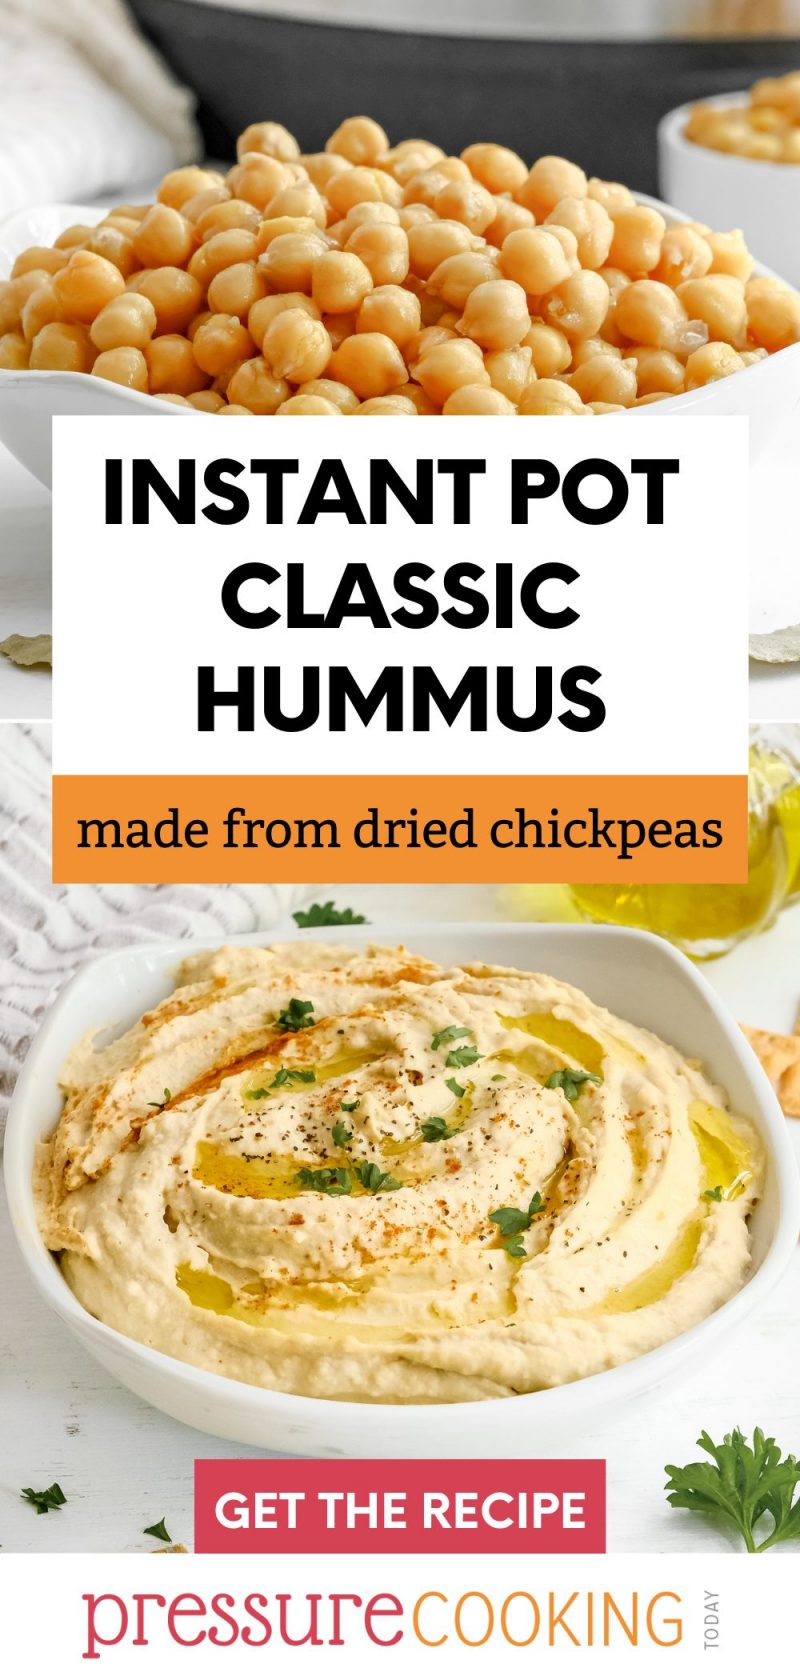 Pinterest image promoting Instant Pot hummus recipe; with a top image featuring a white bowl of cooked chickpeas and a bottom image featuring a 45 degree angle of a swirly bowl of cooked hummus, finished with oil, spices, and green parsley